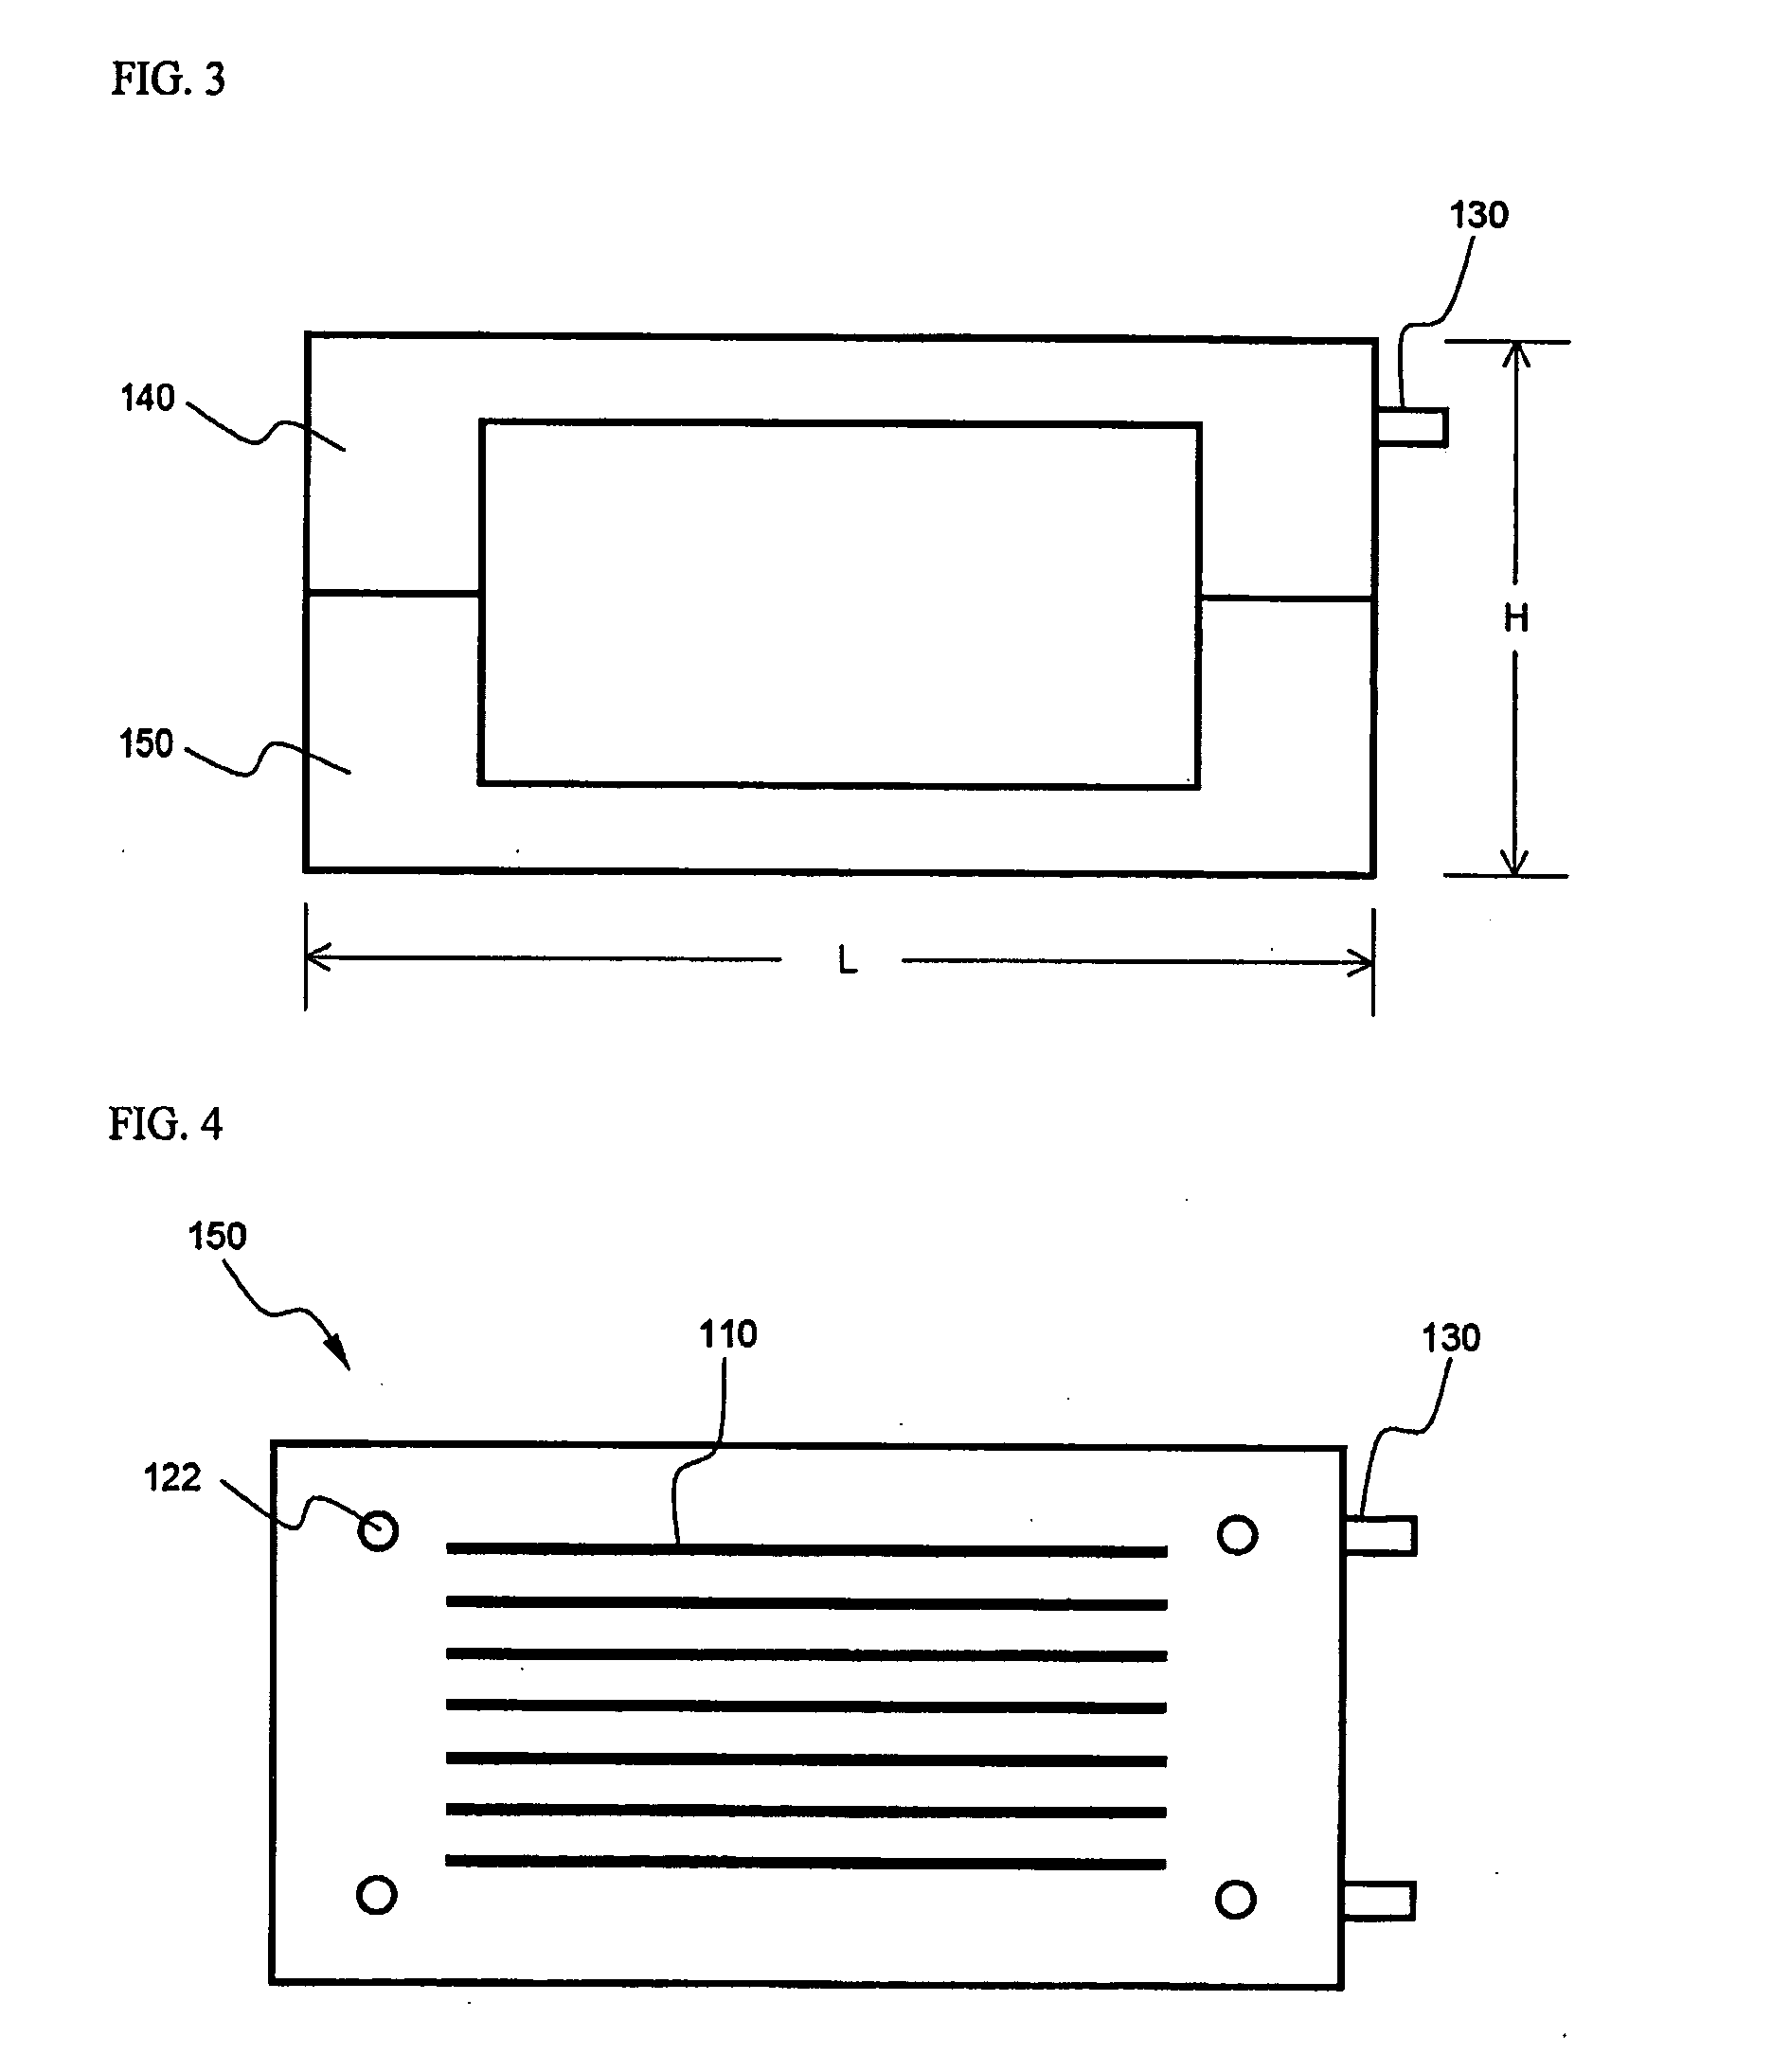 Battery module of compact joint structure